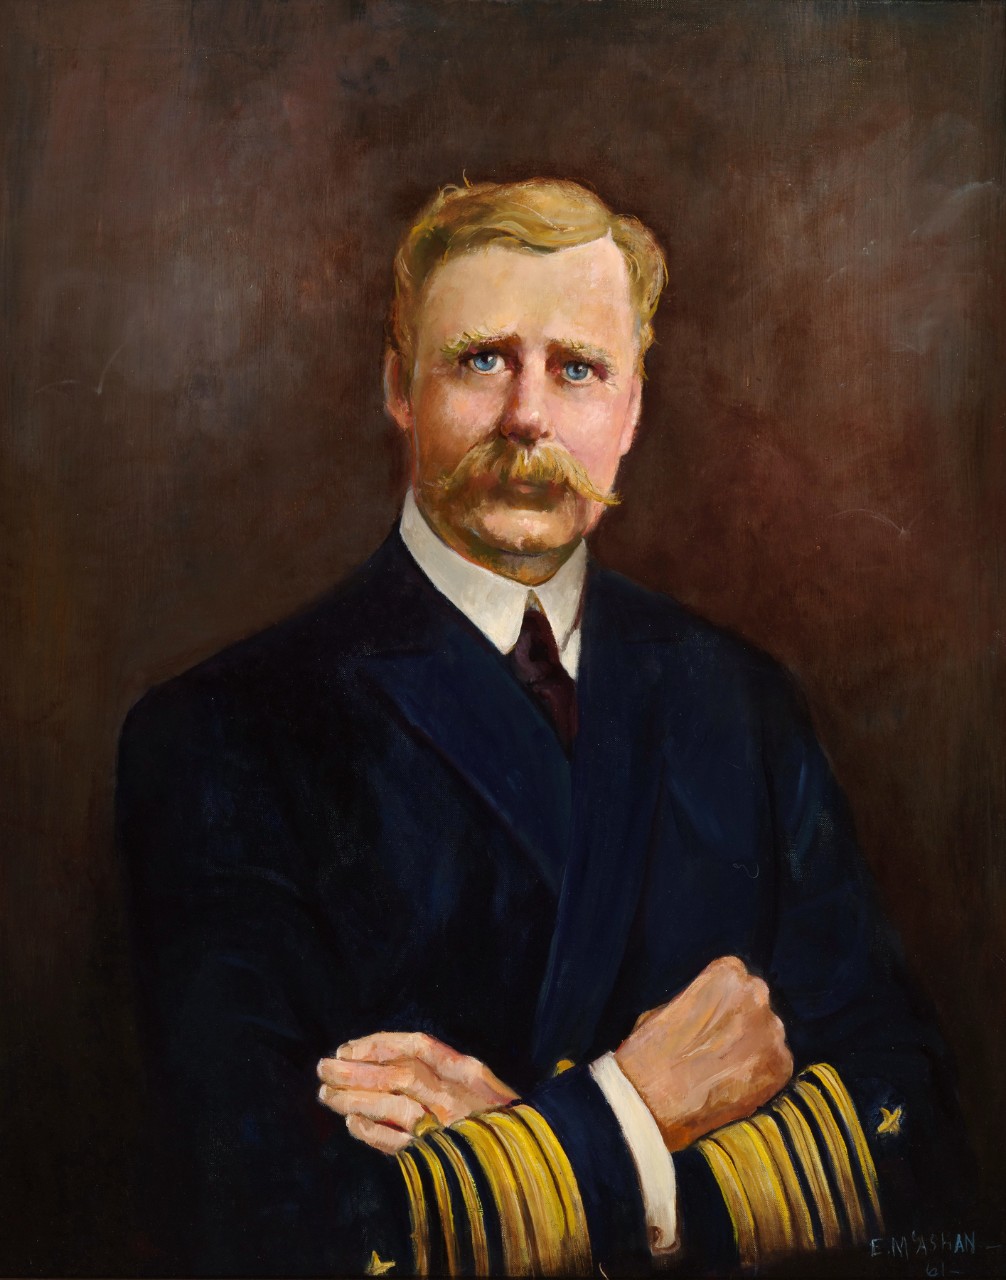 Portrait from the waist up of a naval officer, his arms are folded